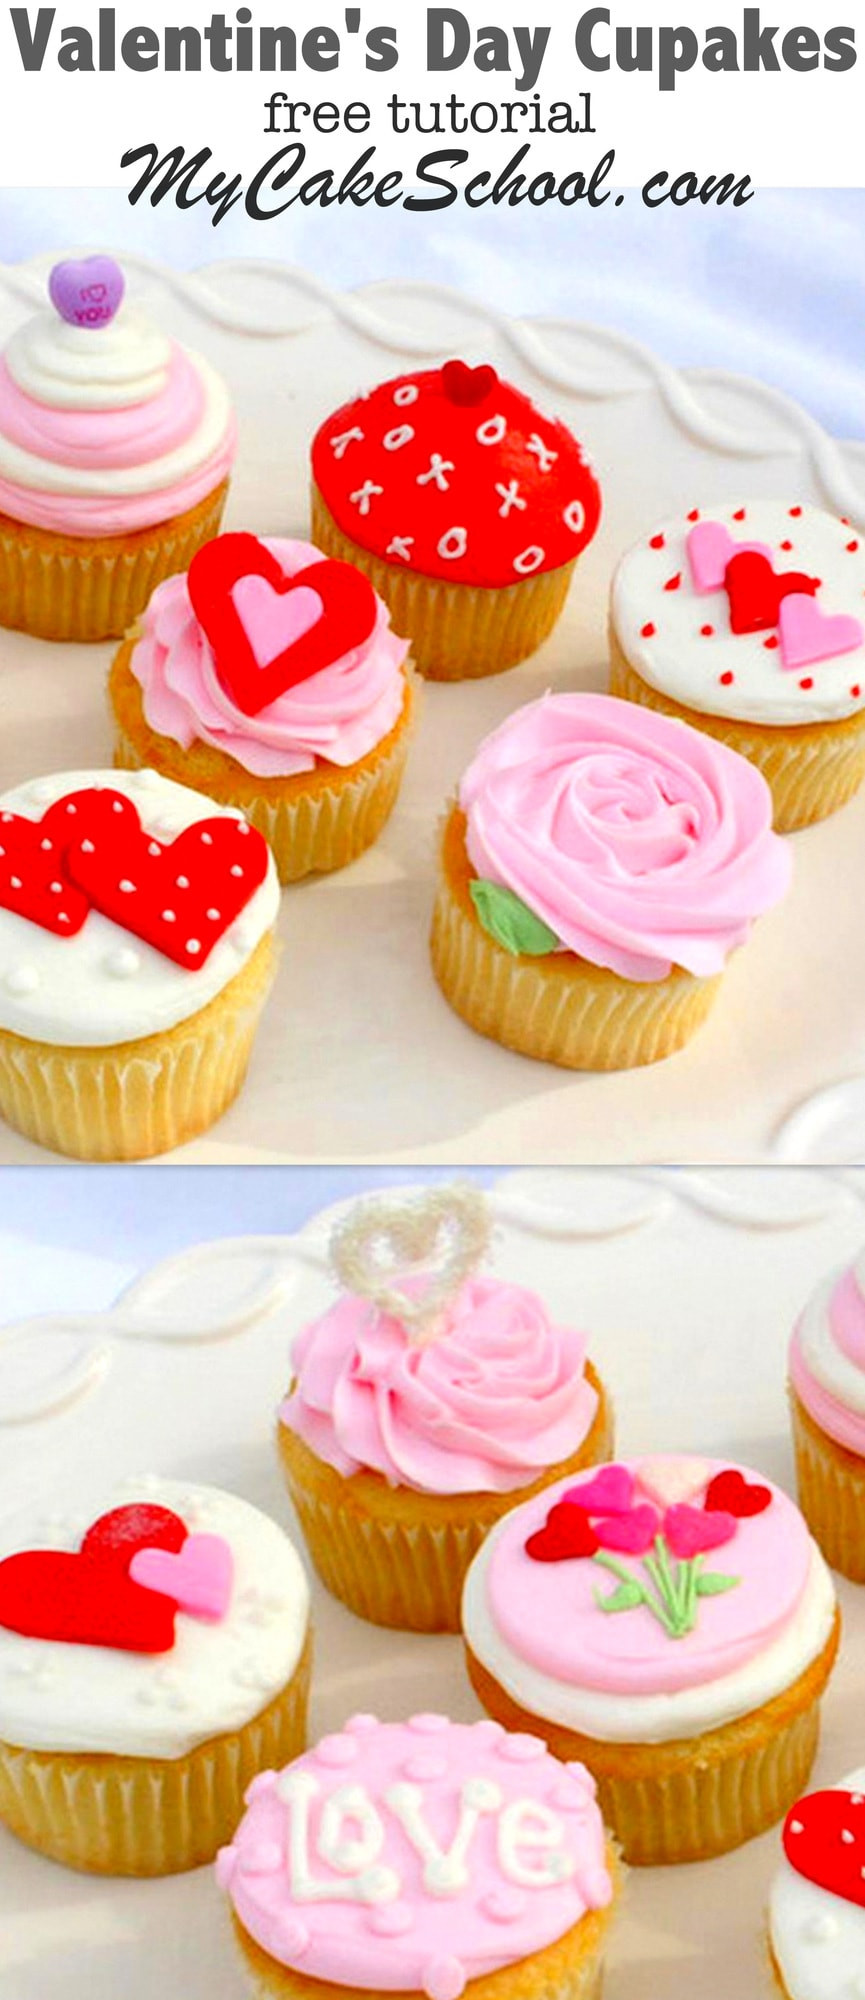 Cakes For Valentines Day
 Favorite Valentine s Day Cake Recipes and Tutorials